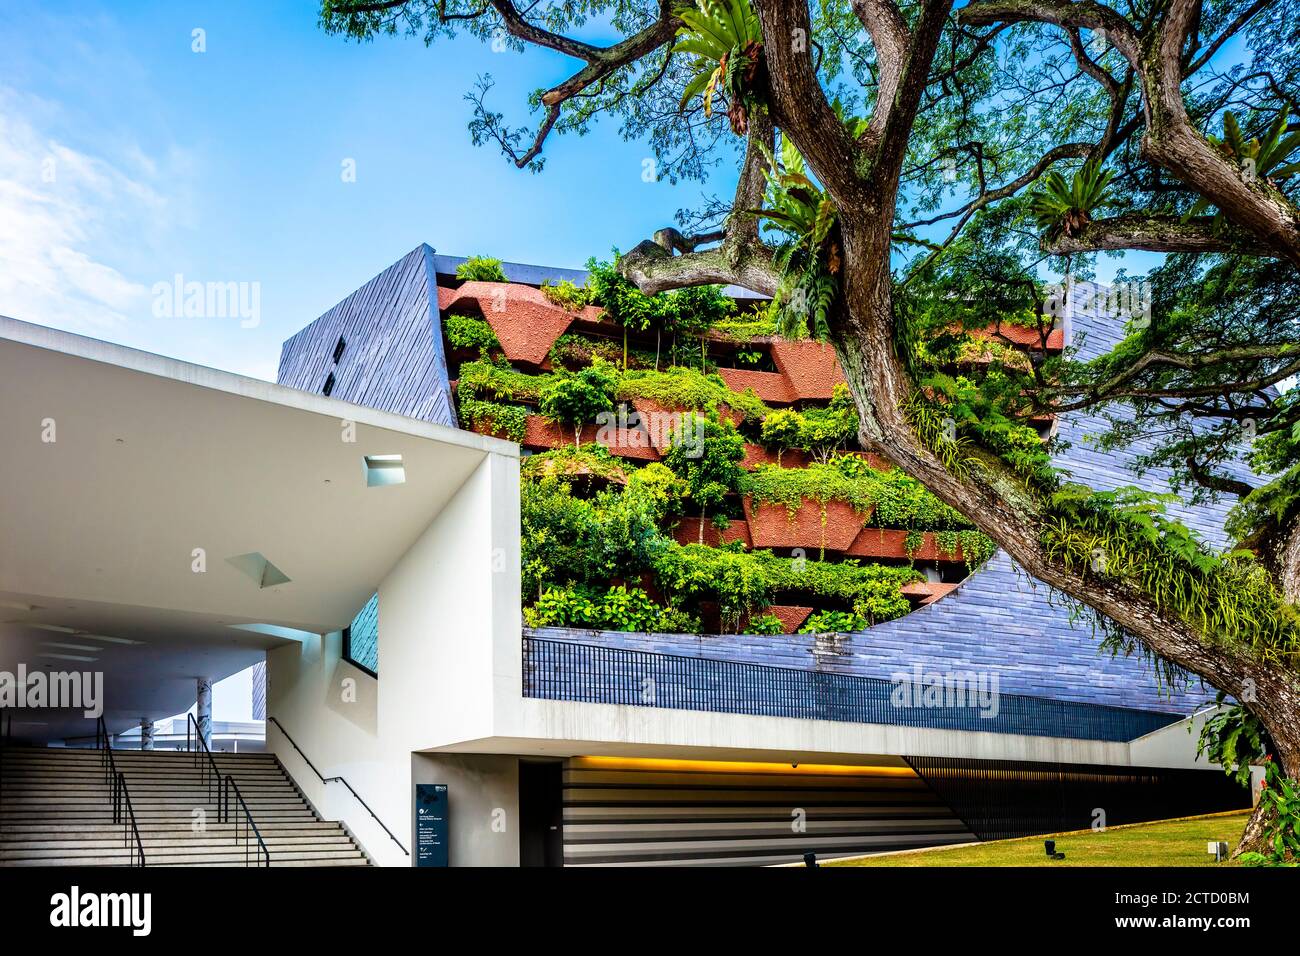 Exterior view of the Lee Kong Chian Natural History Museum, Faculty of Science, National University of Singapore. Stock Photo